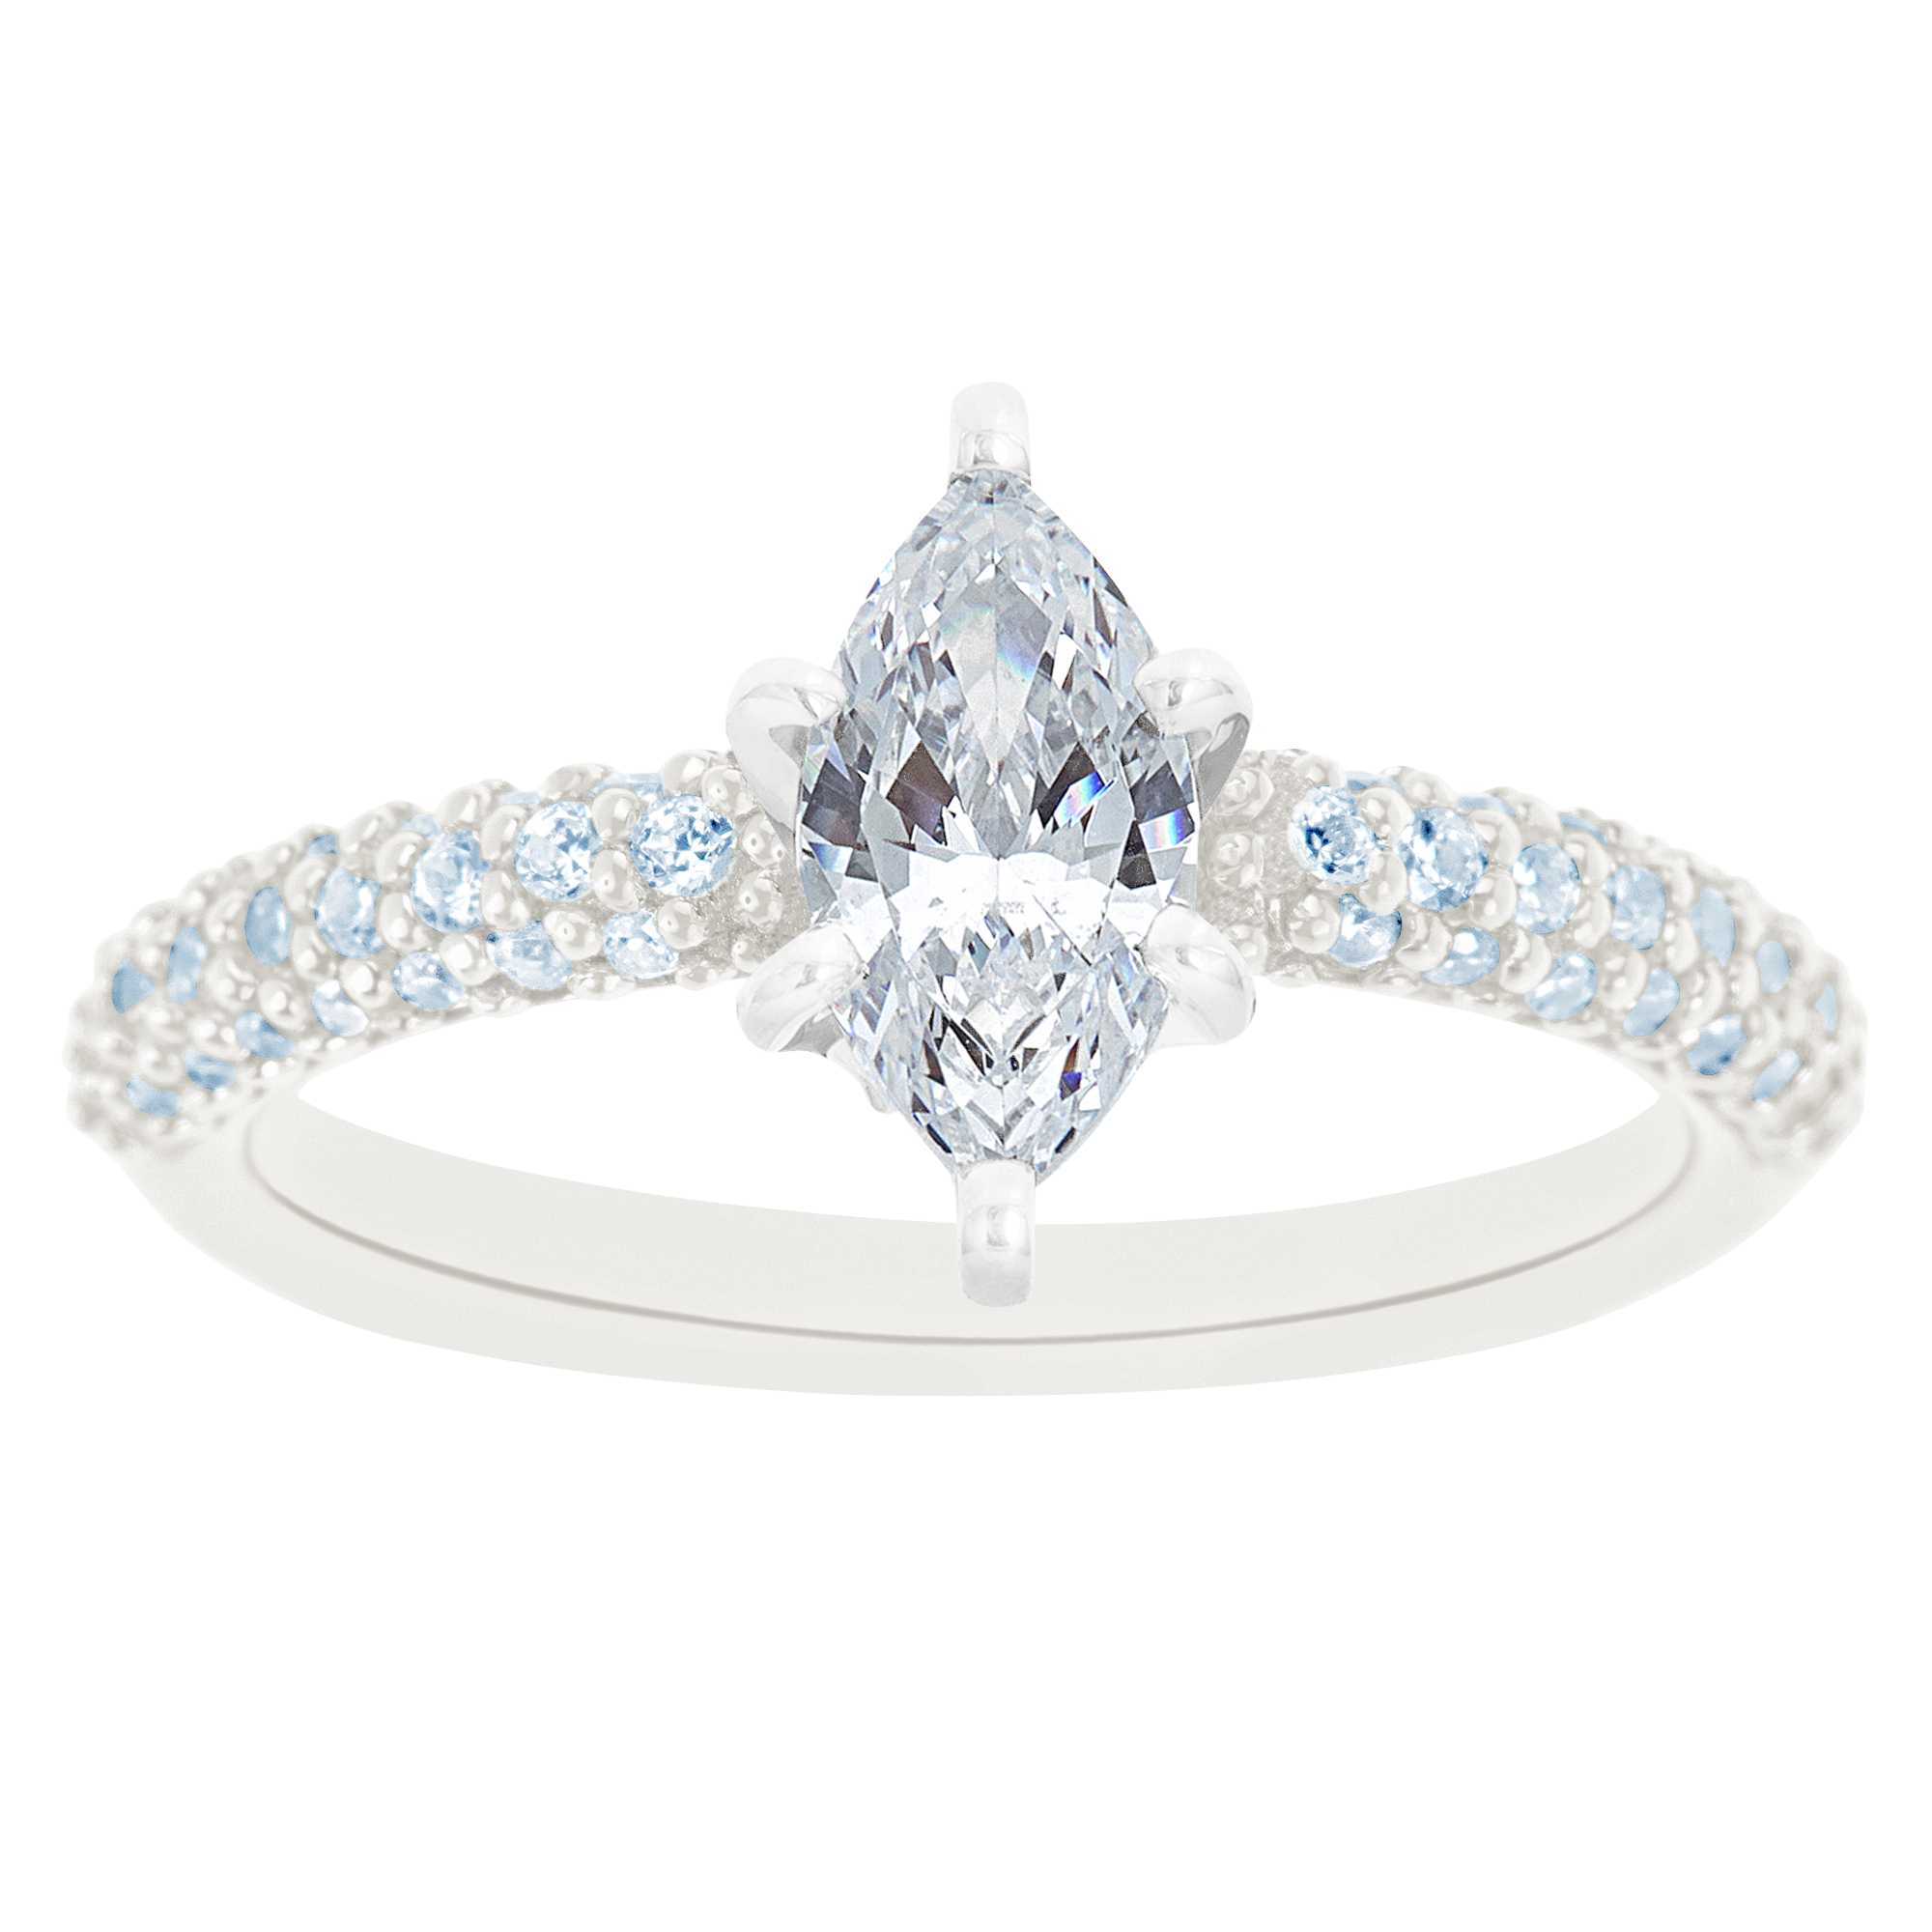 New York City Diamond District 14K White Gold Marquise Certified Diamond Engagement Ring